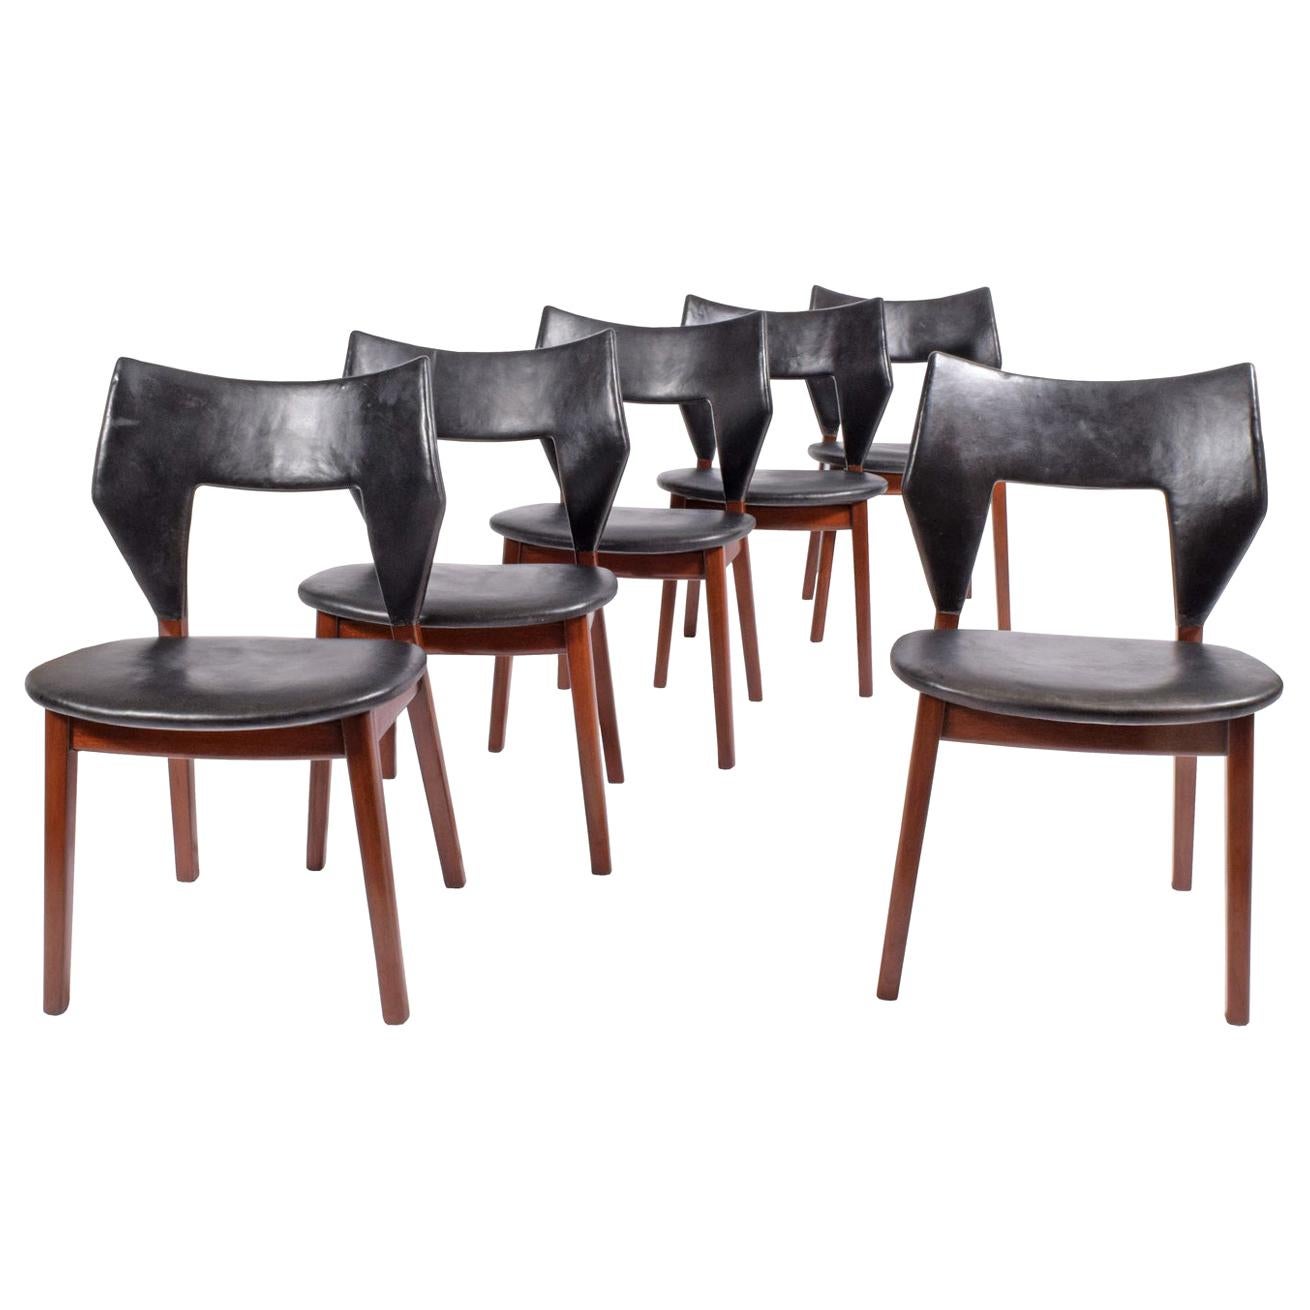 Tove & Edvard Kind-Larsen Rare Six Dining Chairs for Thorald Madsen, 1960